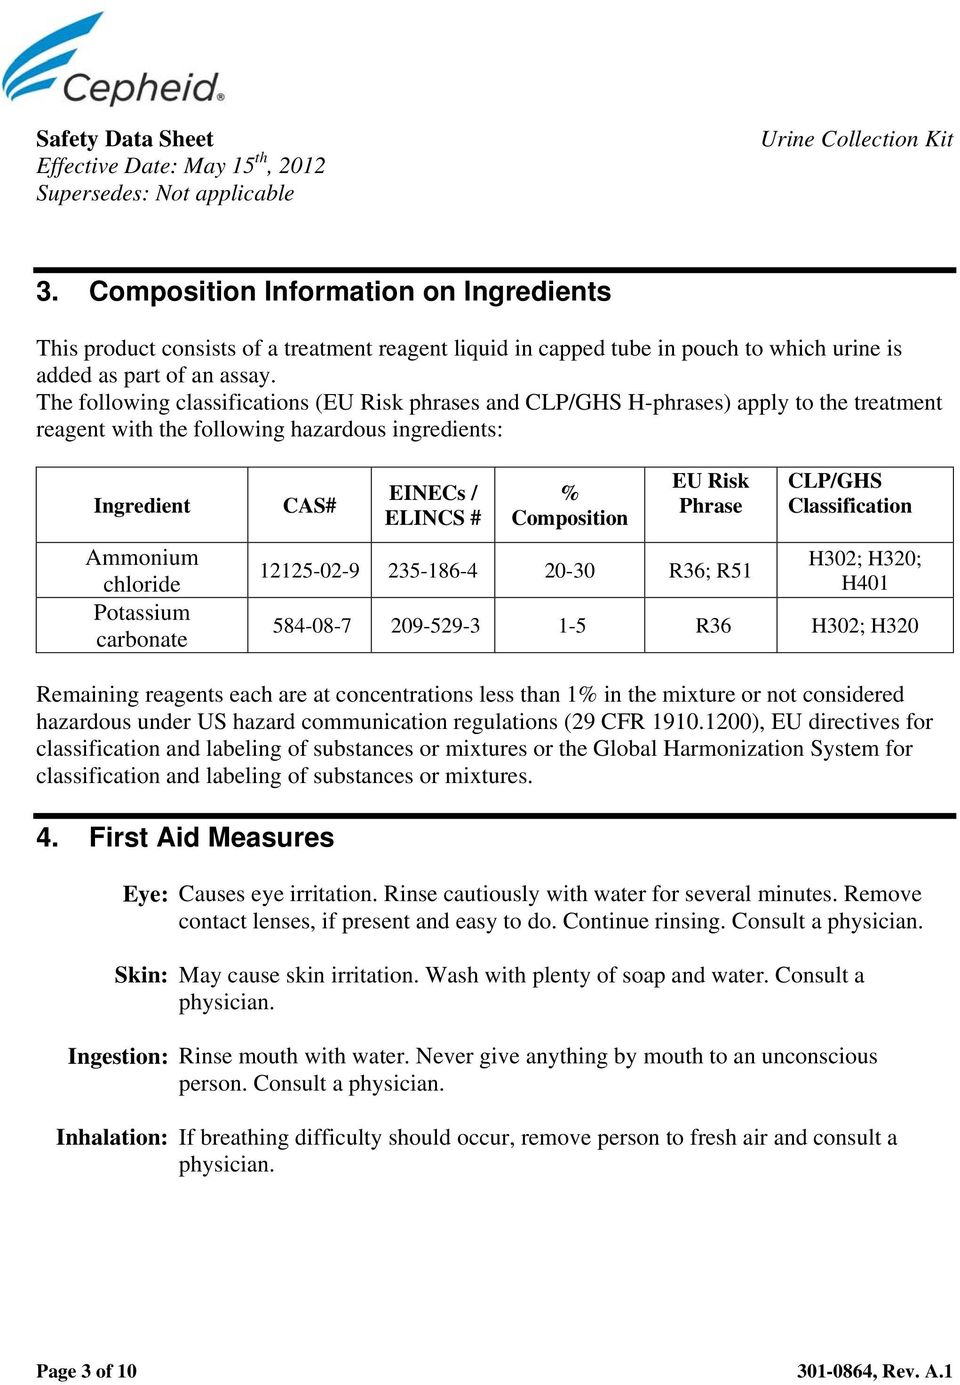 The following classifications (EU Risk phrases and CLP/GHS H-phrases) apply to the treatment reagent with the following hazardous ingredients: Ingredient Ammonium chloride Potassium carbonate CAS#